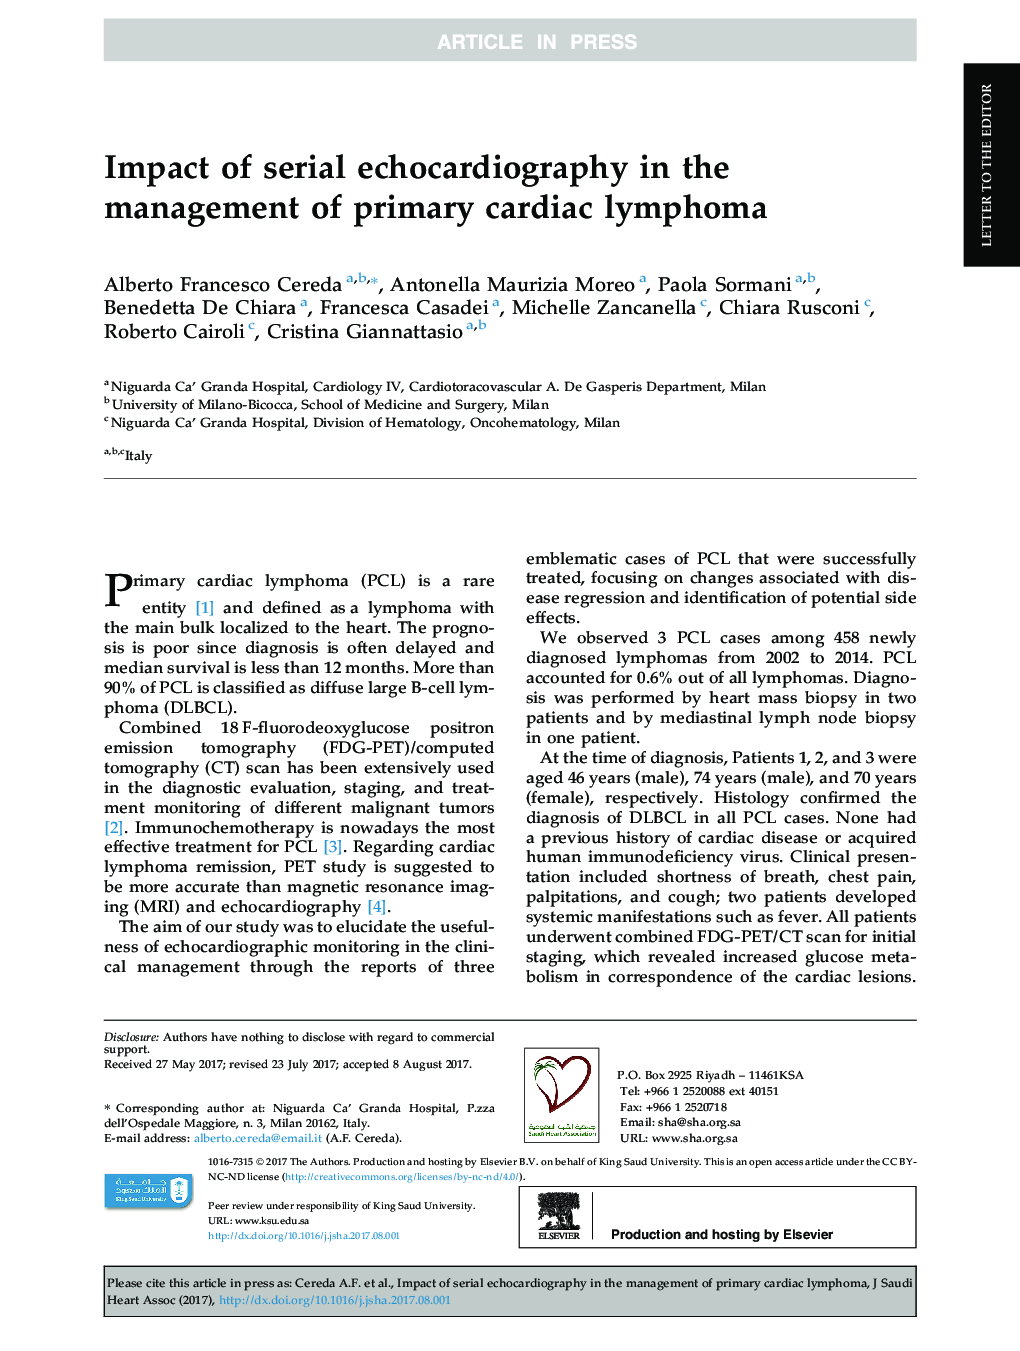 Impact of serial echocardiography in the management of primary cardiac lymphoma